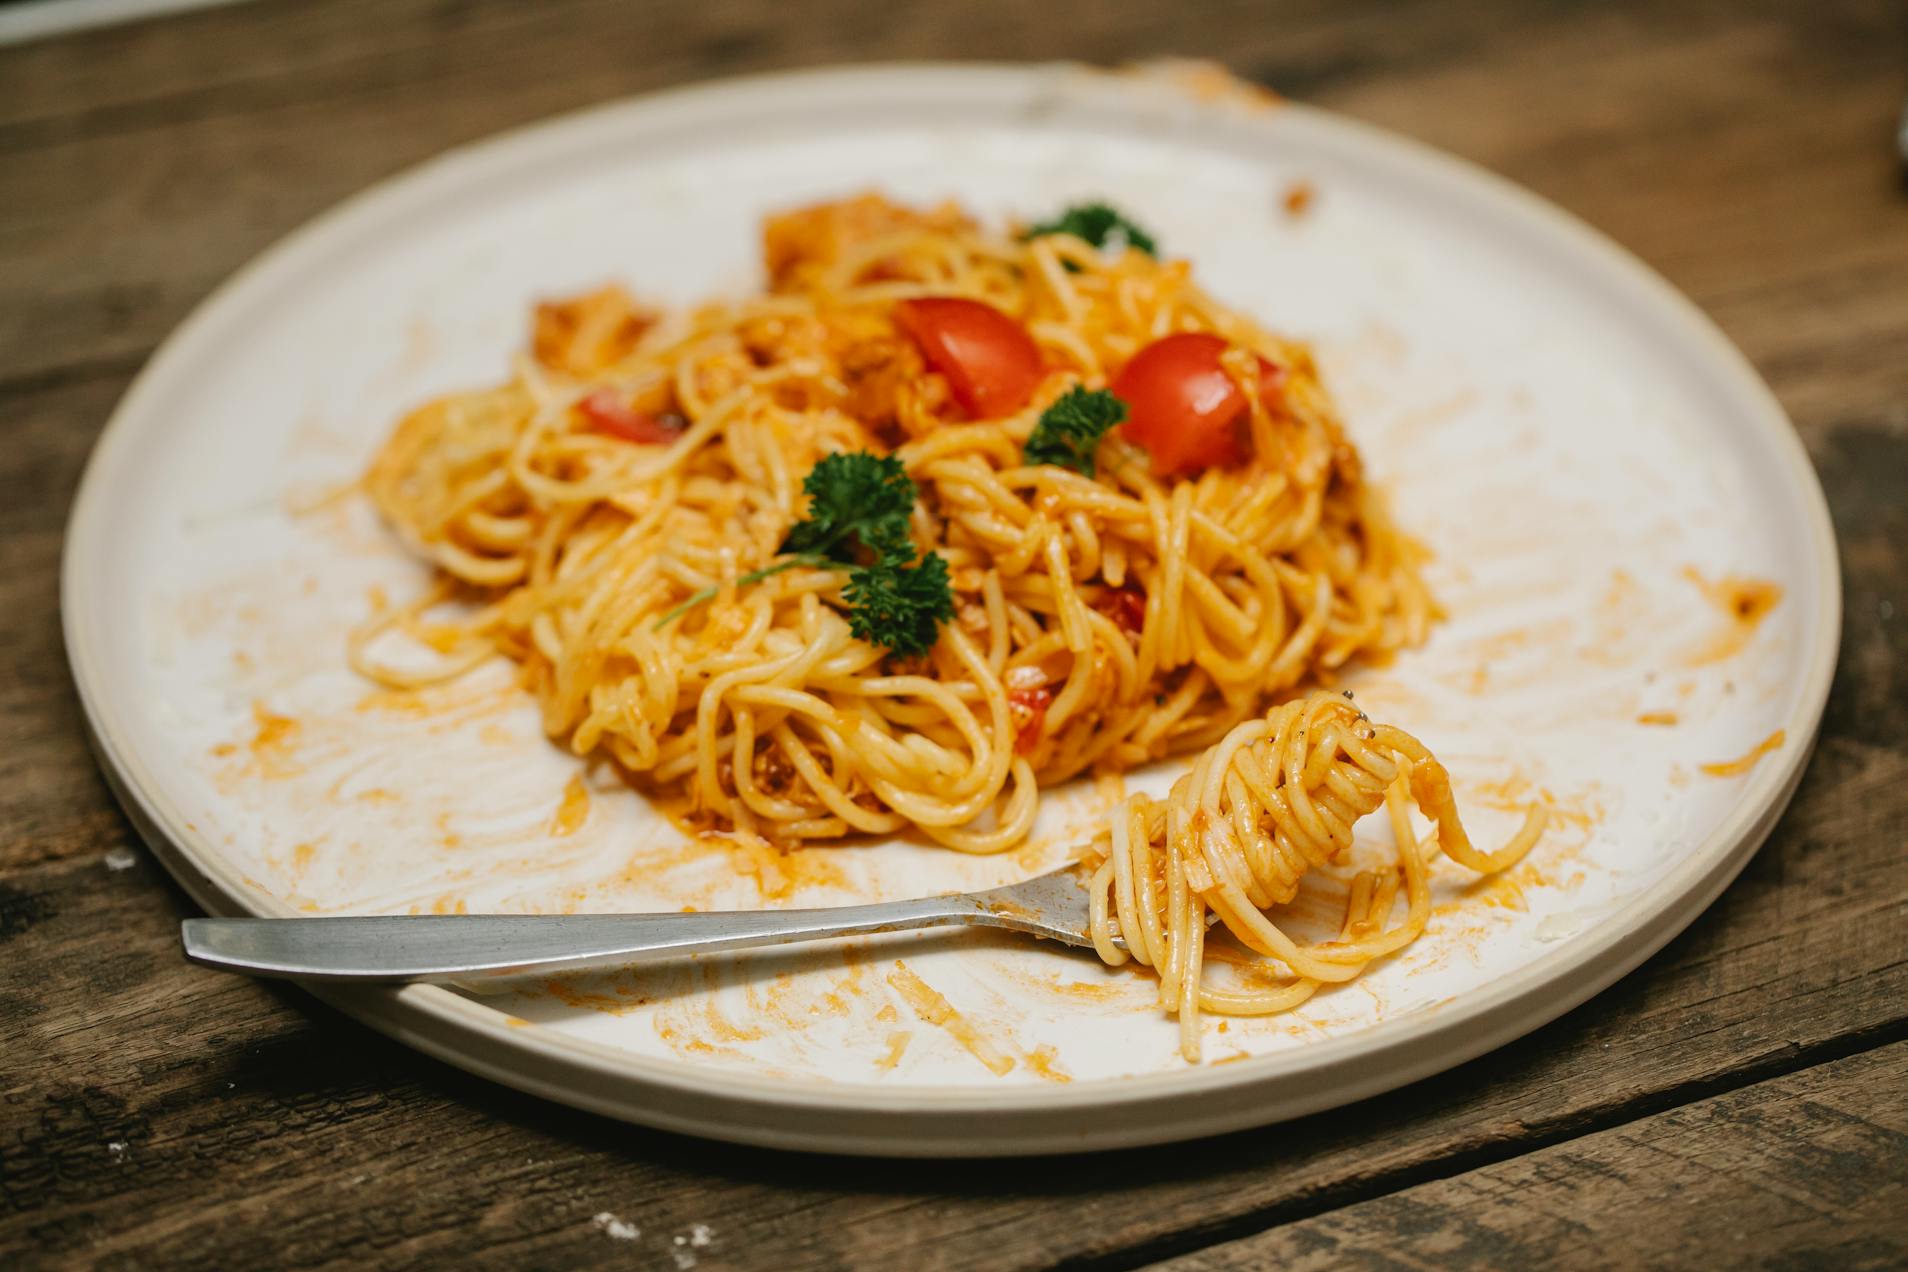 A plate of pasta on a table | Source: Pexels